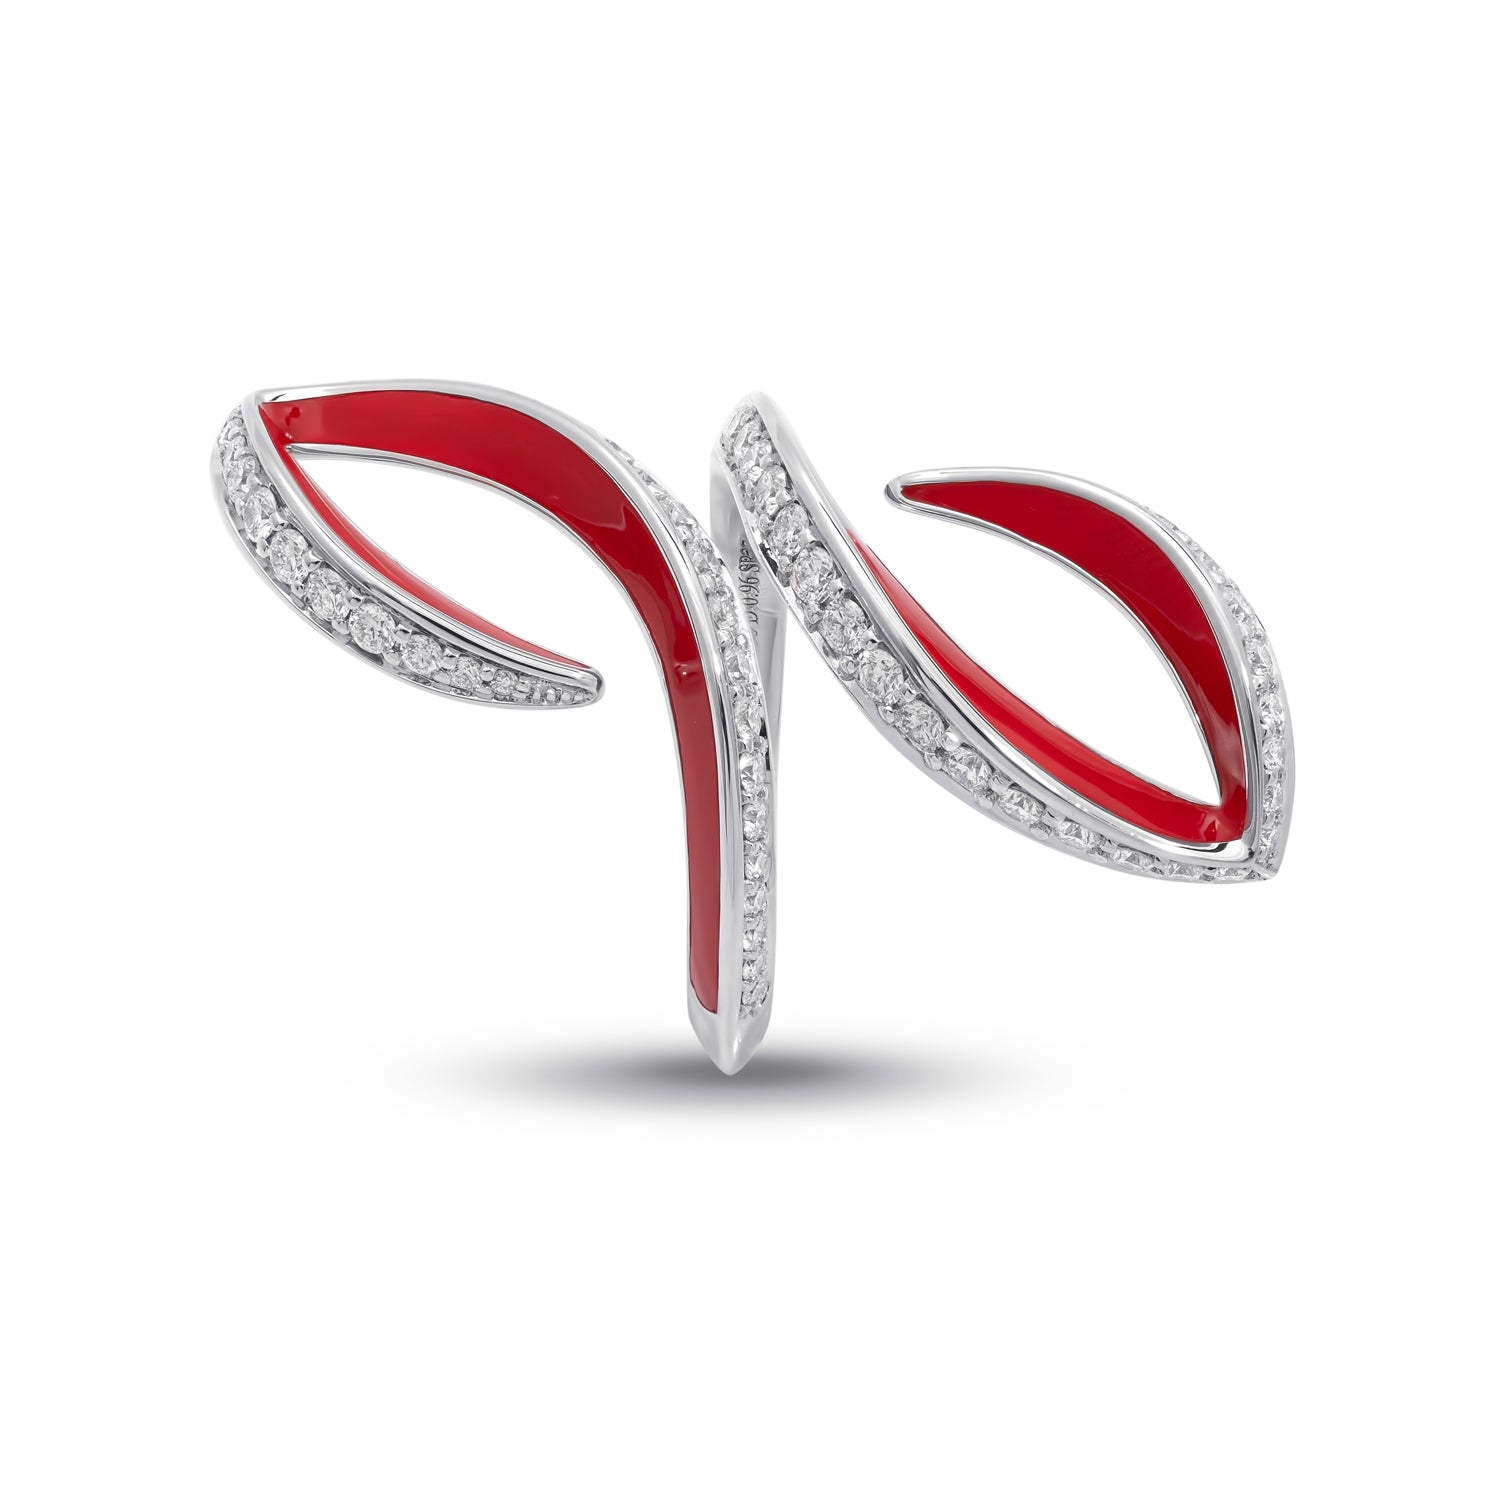 VIVA Double Curved Ring with Diamonds and Red Enamel